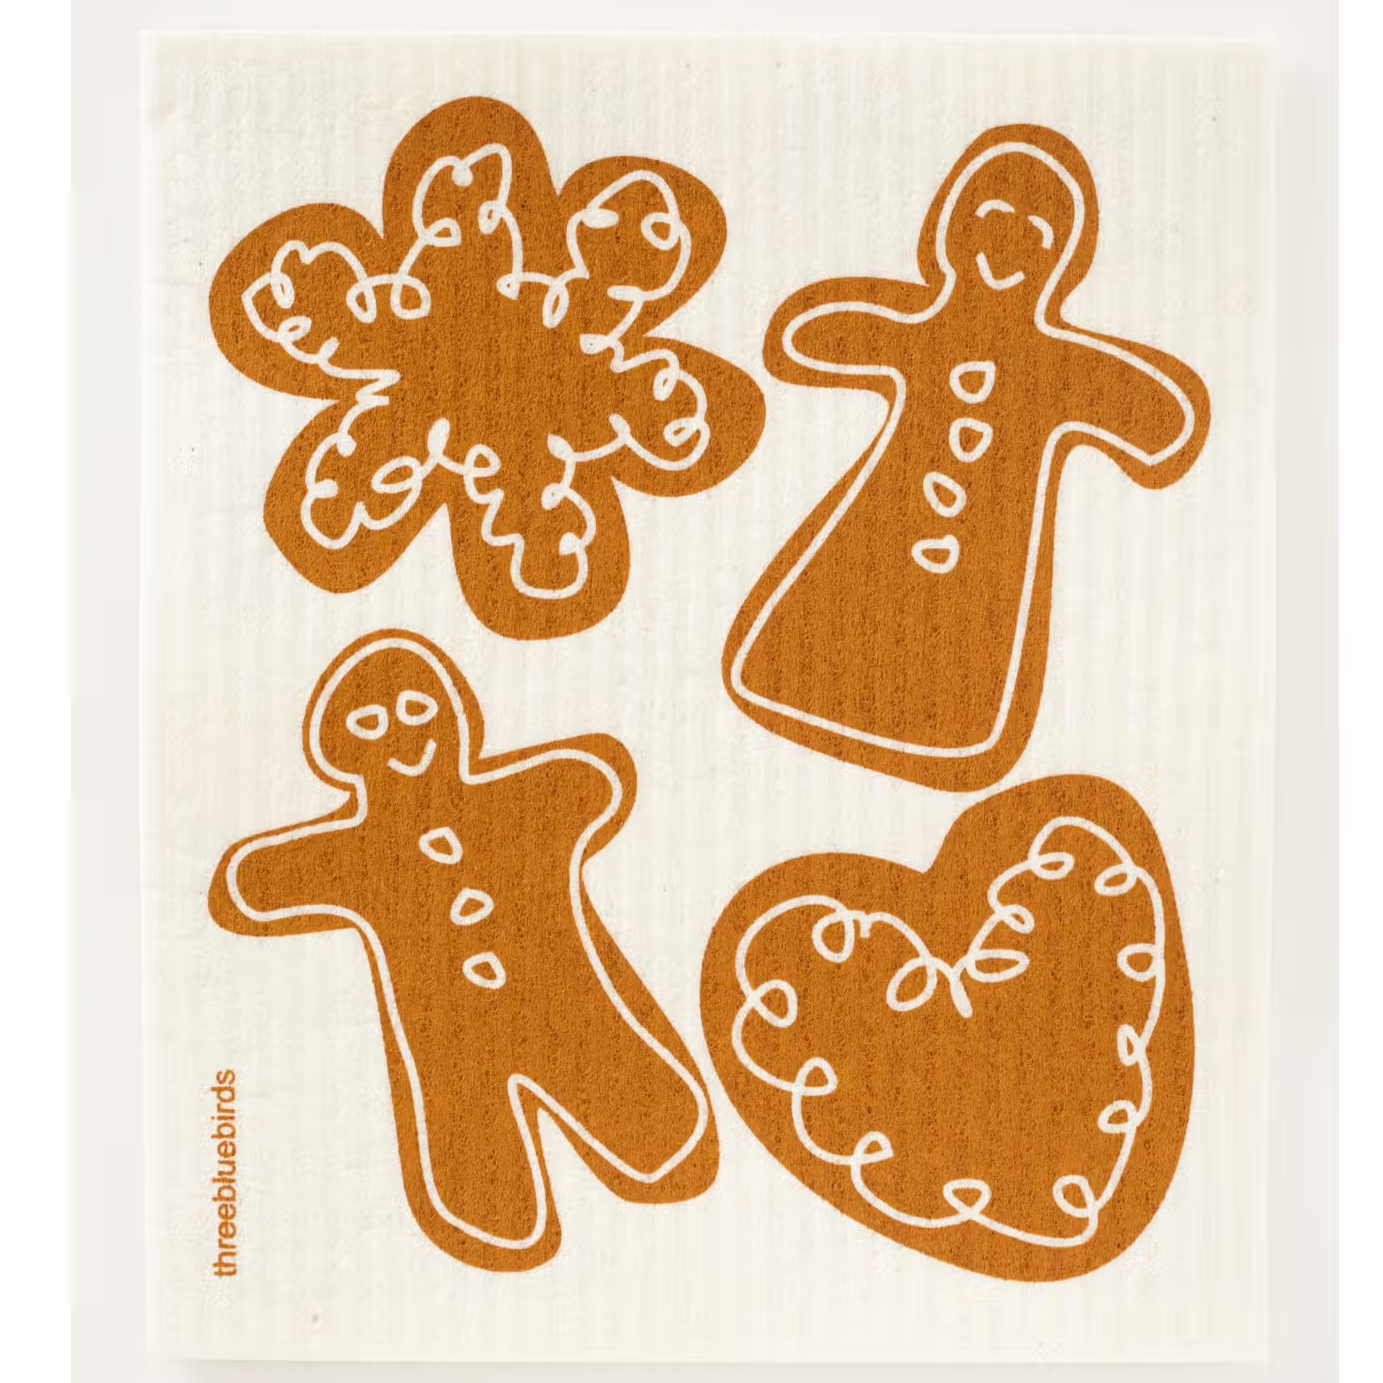 Two gingerbread men in the center with brown heart and brown snowflake.